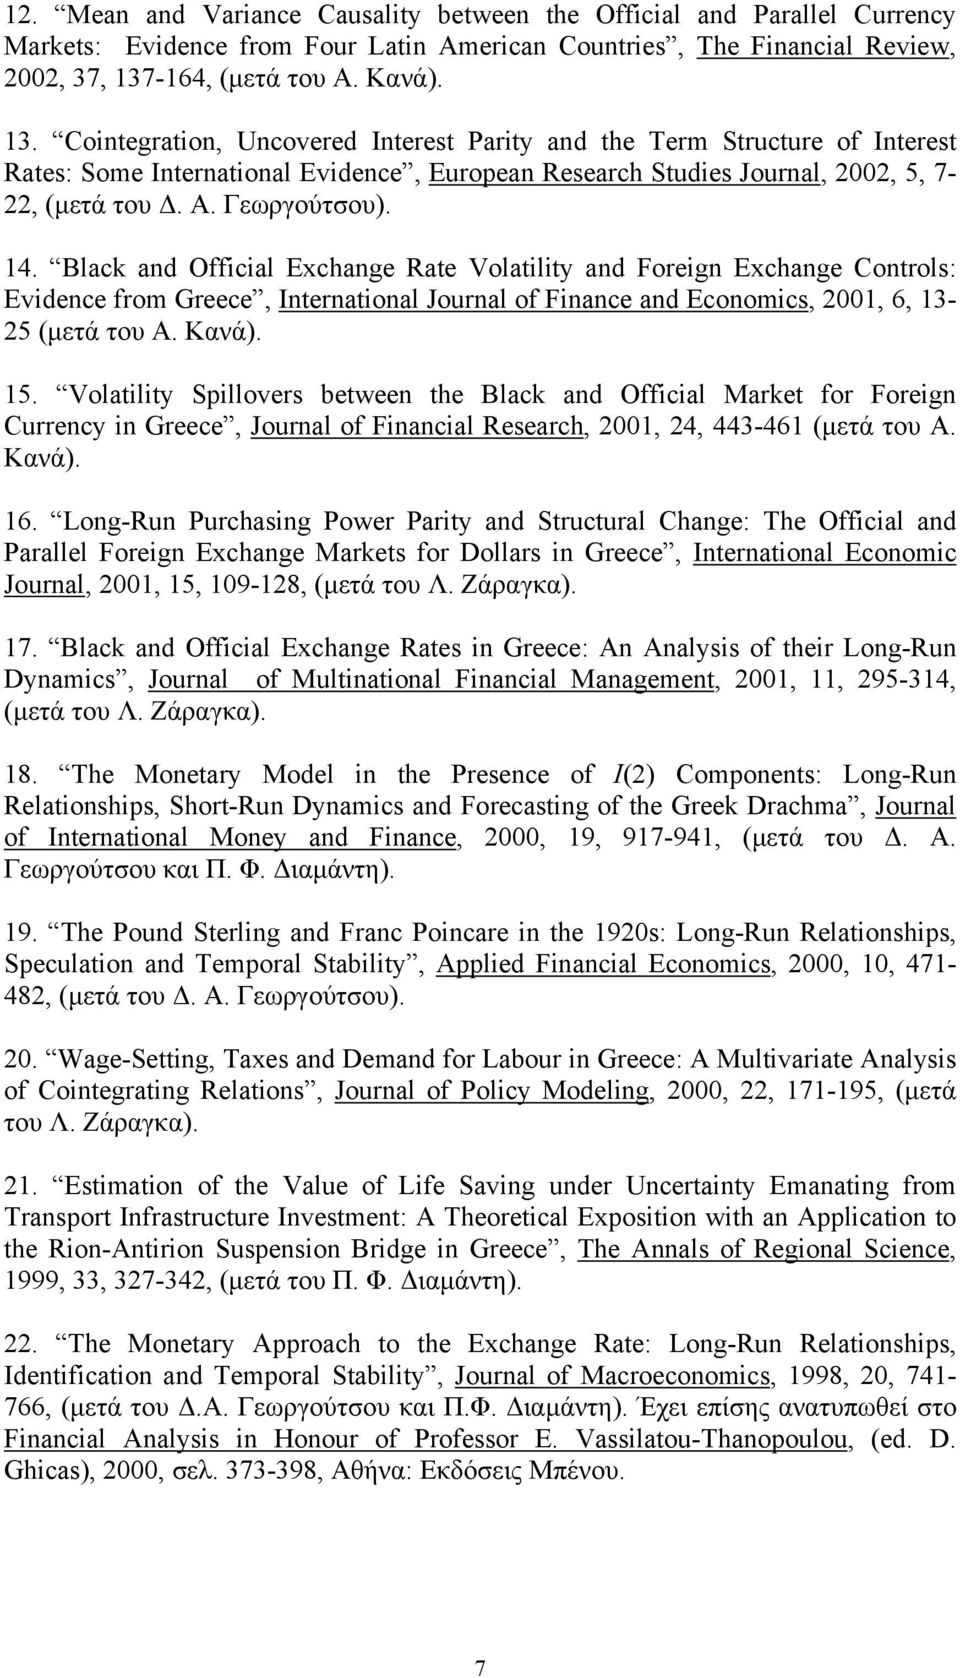 Cointegration, Uncovered Interest Parity and the Term Structure of Interest Rates: Some International Evidence, European Research Studies Journal, 2002, 5, 7-22, (µετά του. Α. Γεωργούτσου). 14.